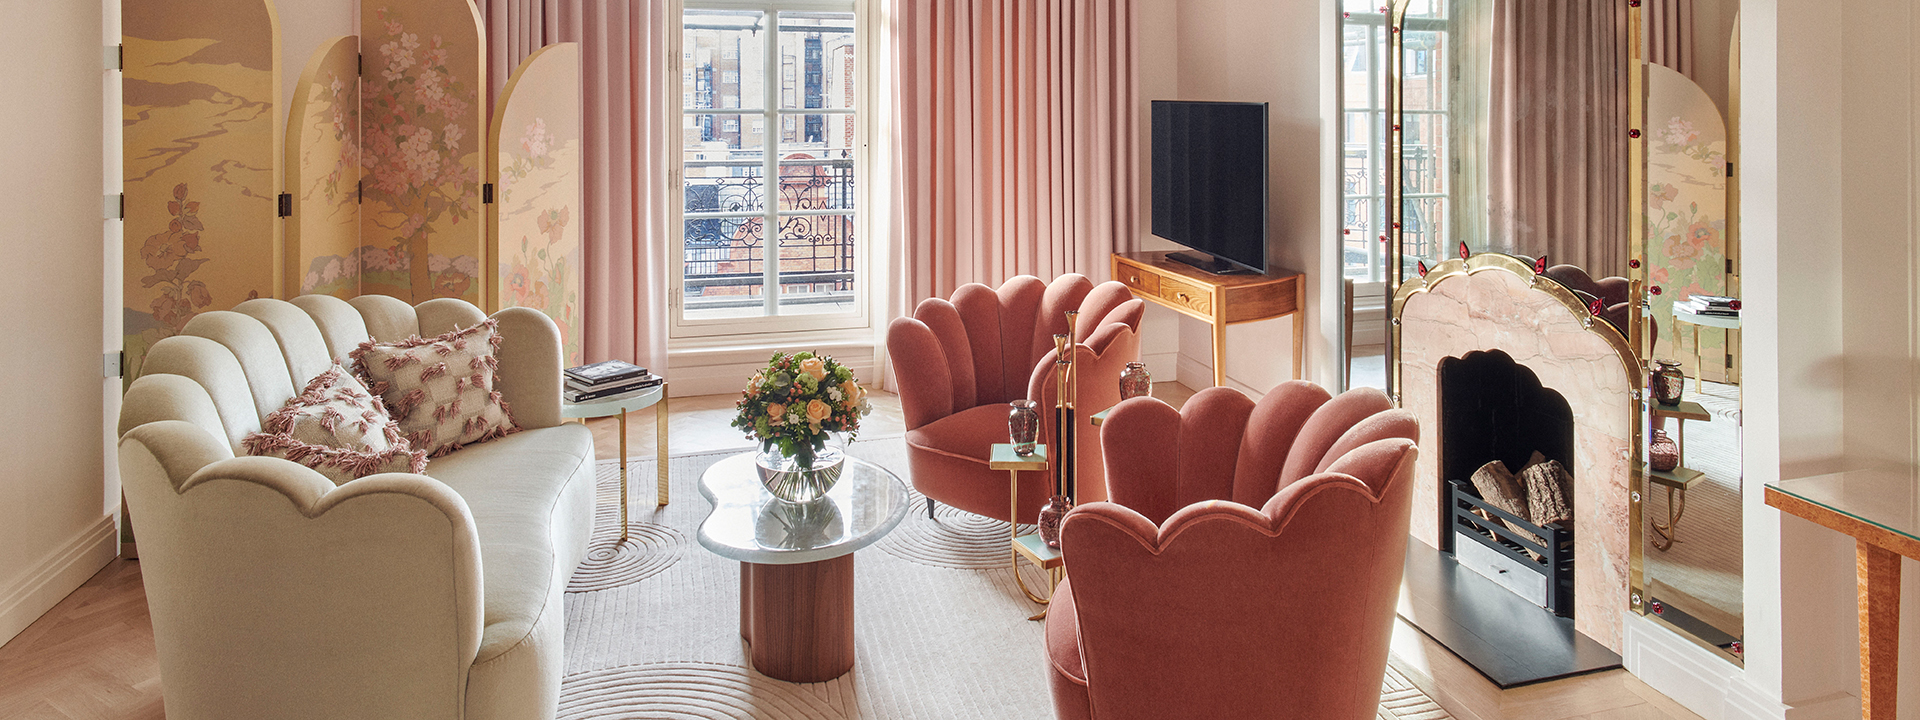 Mayfair Suite at Claridge's interior. Two pink scalloped arm chairs are in view to the left, to the right is a cream couch. Window in the background.